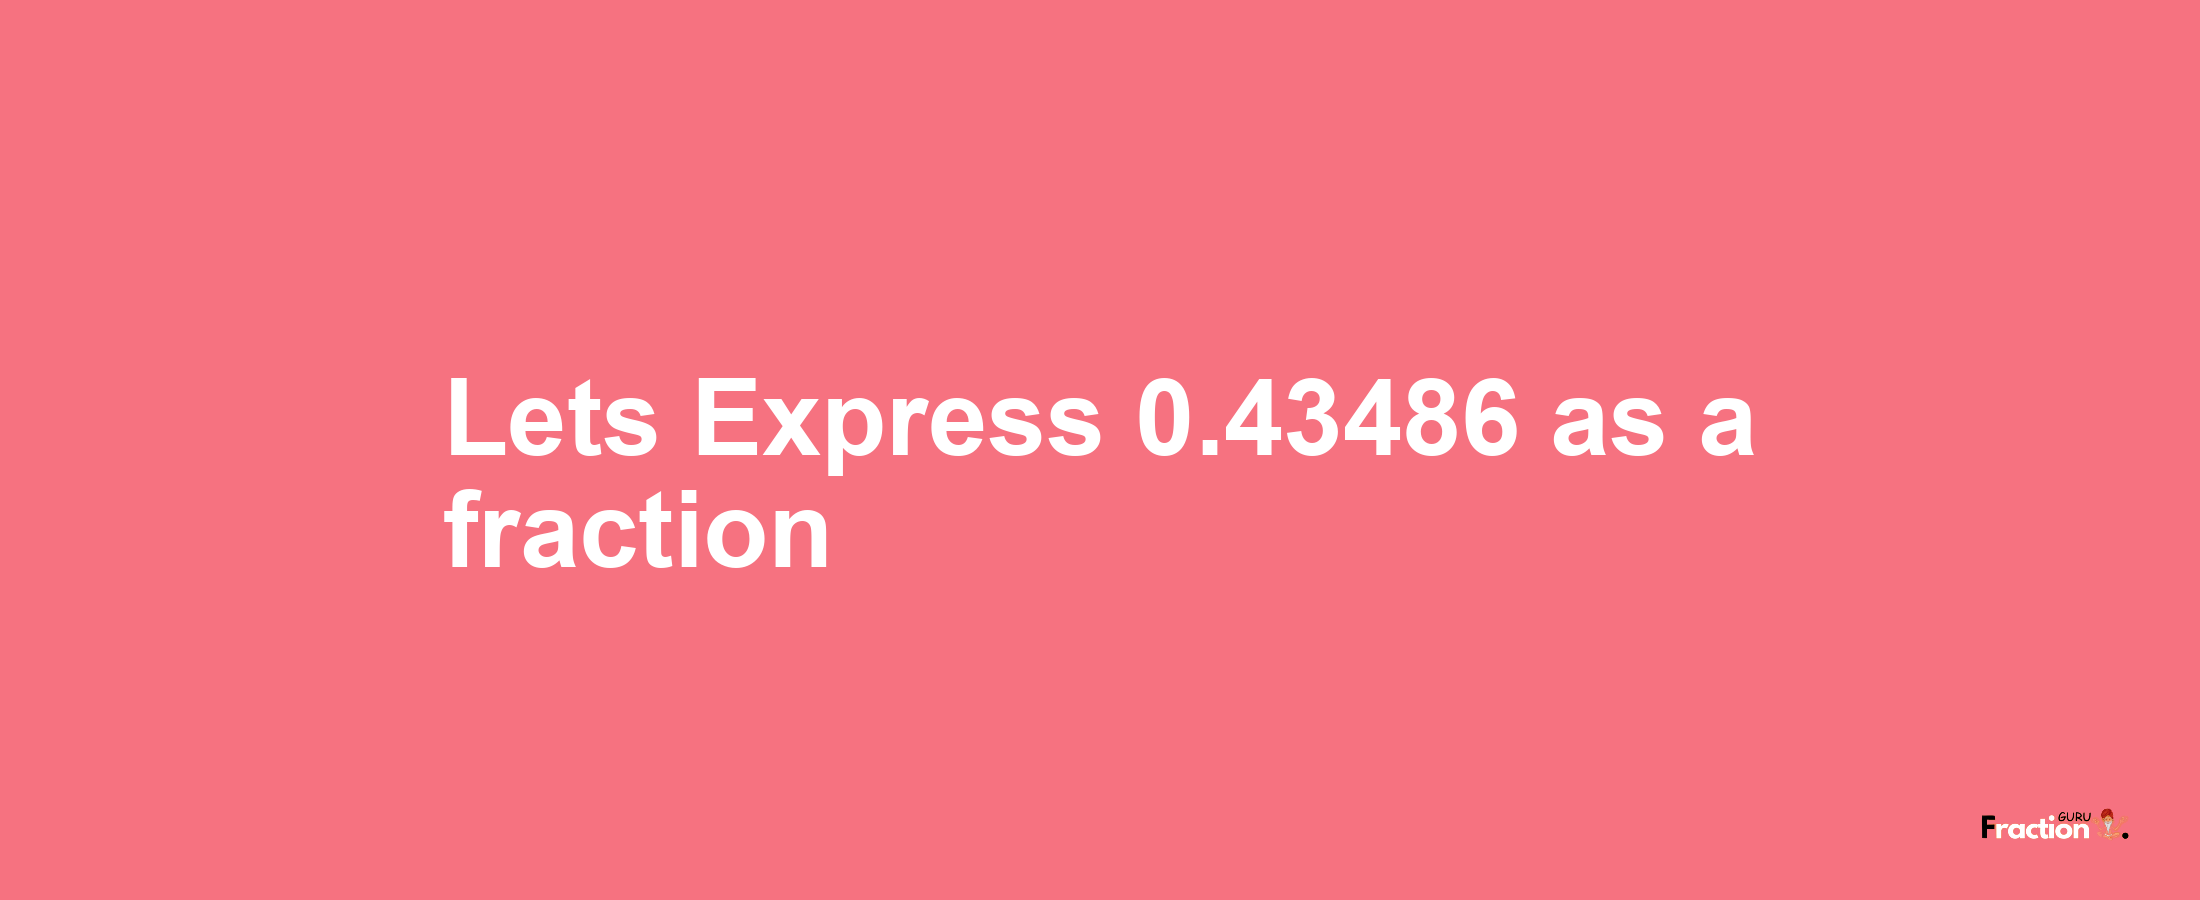 Lets Express 0.43486 as afraction